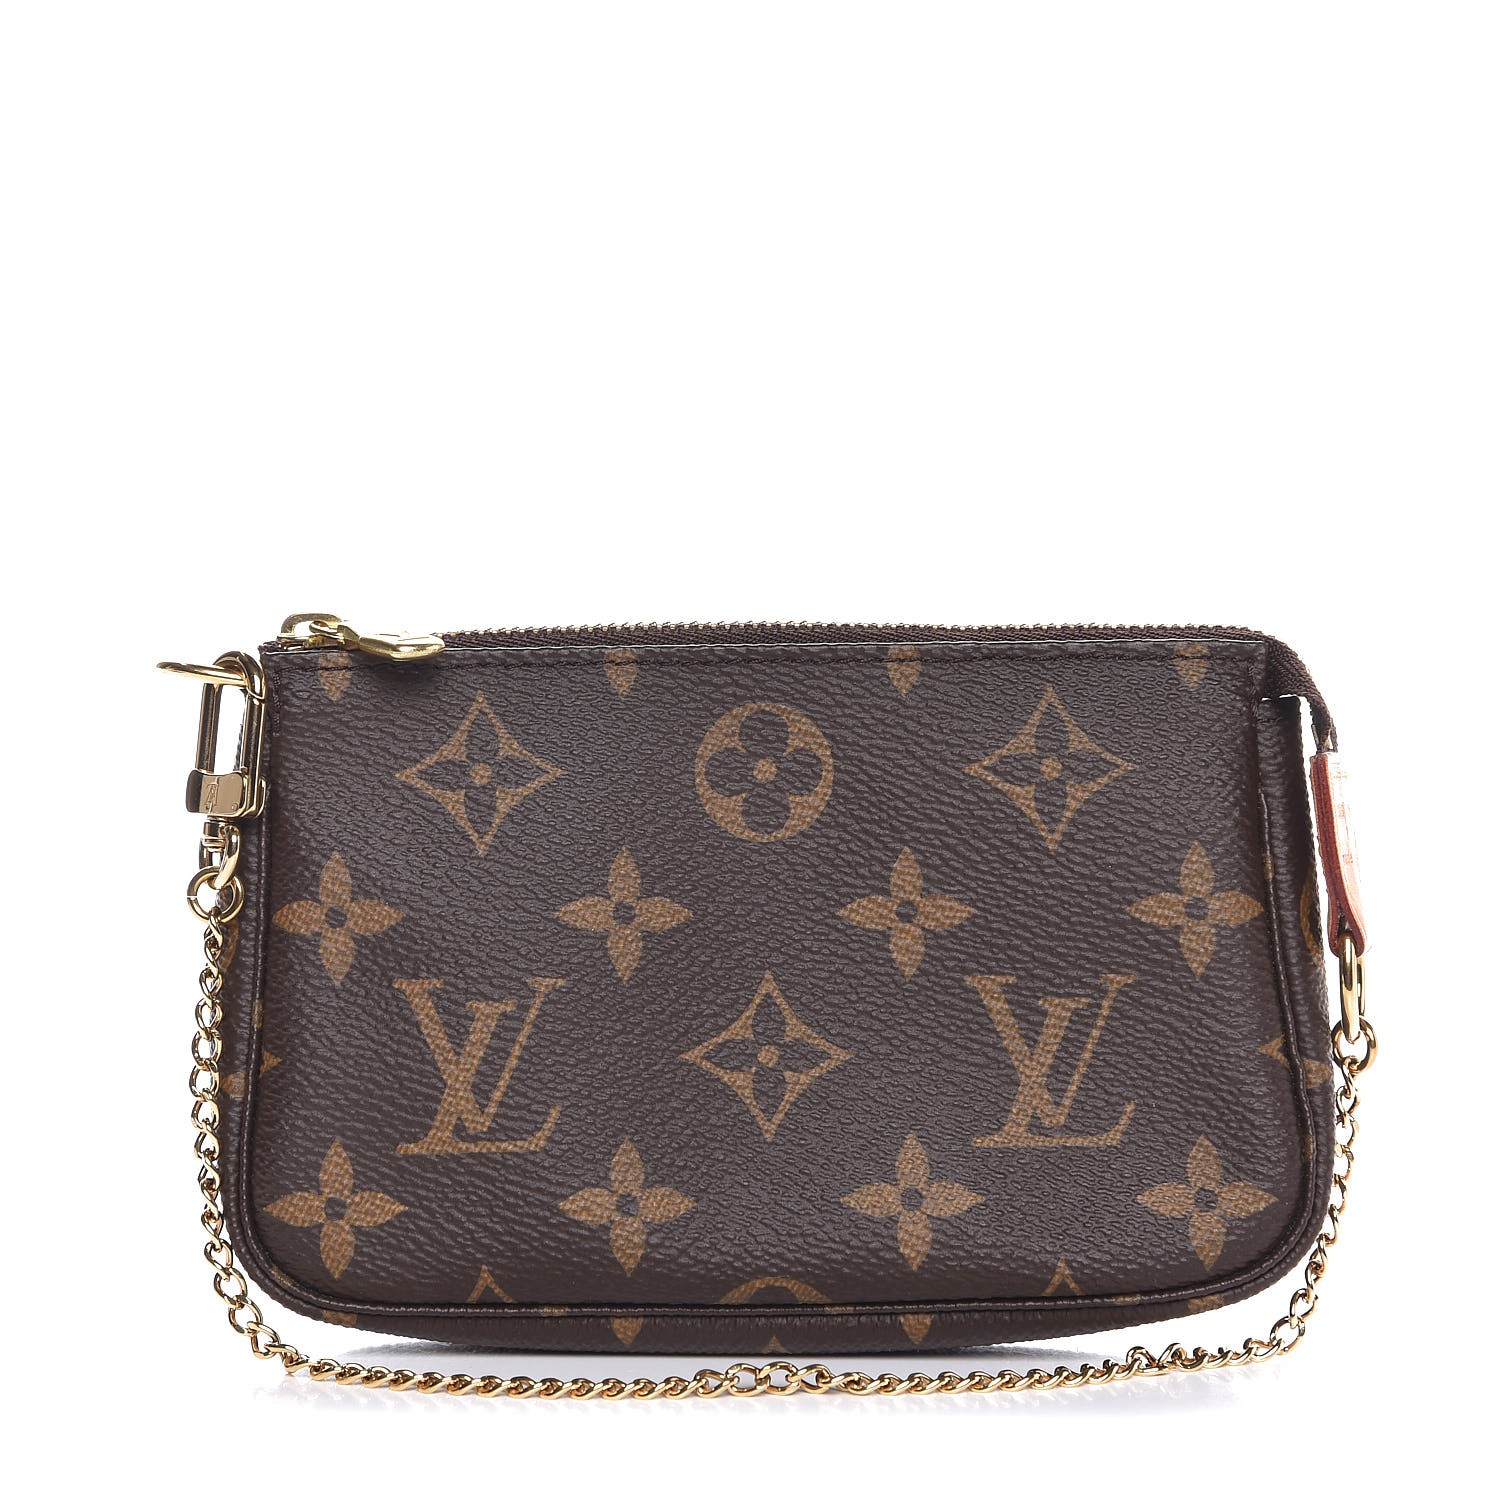 Lv Coin Purse Dhgate  Natural Resource Department